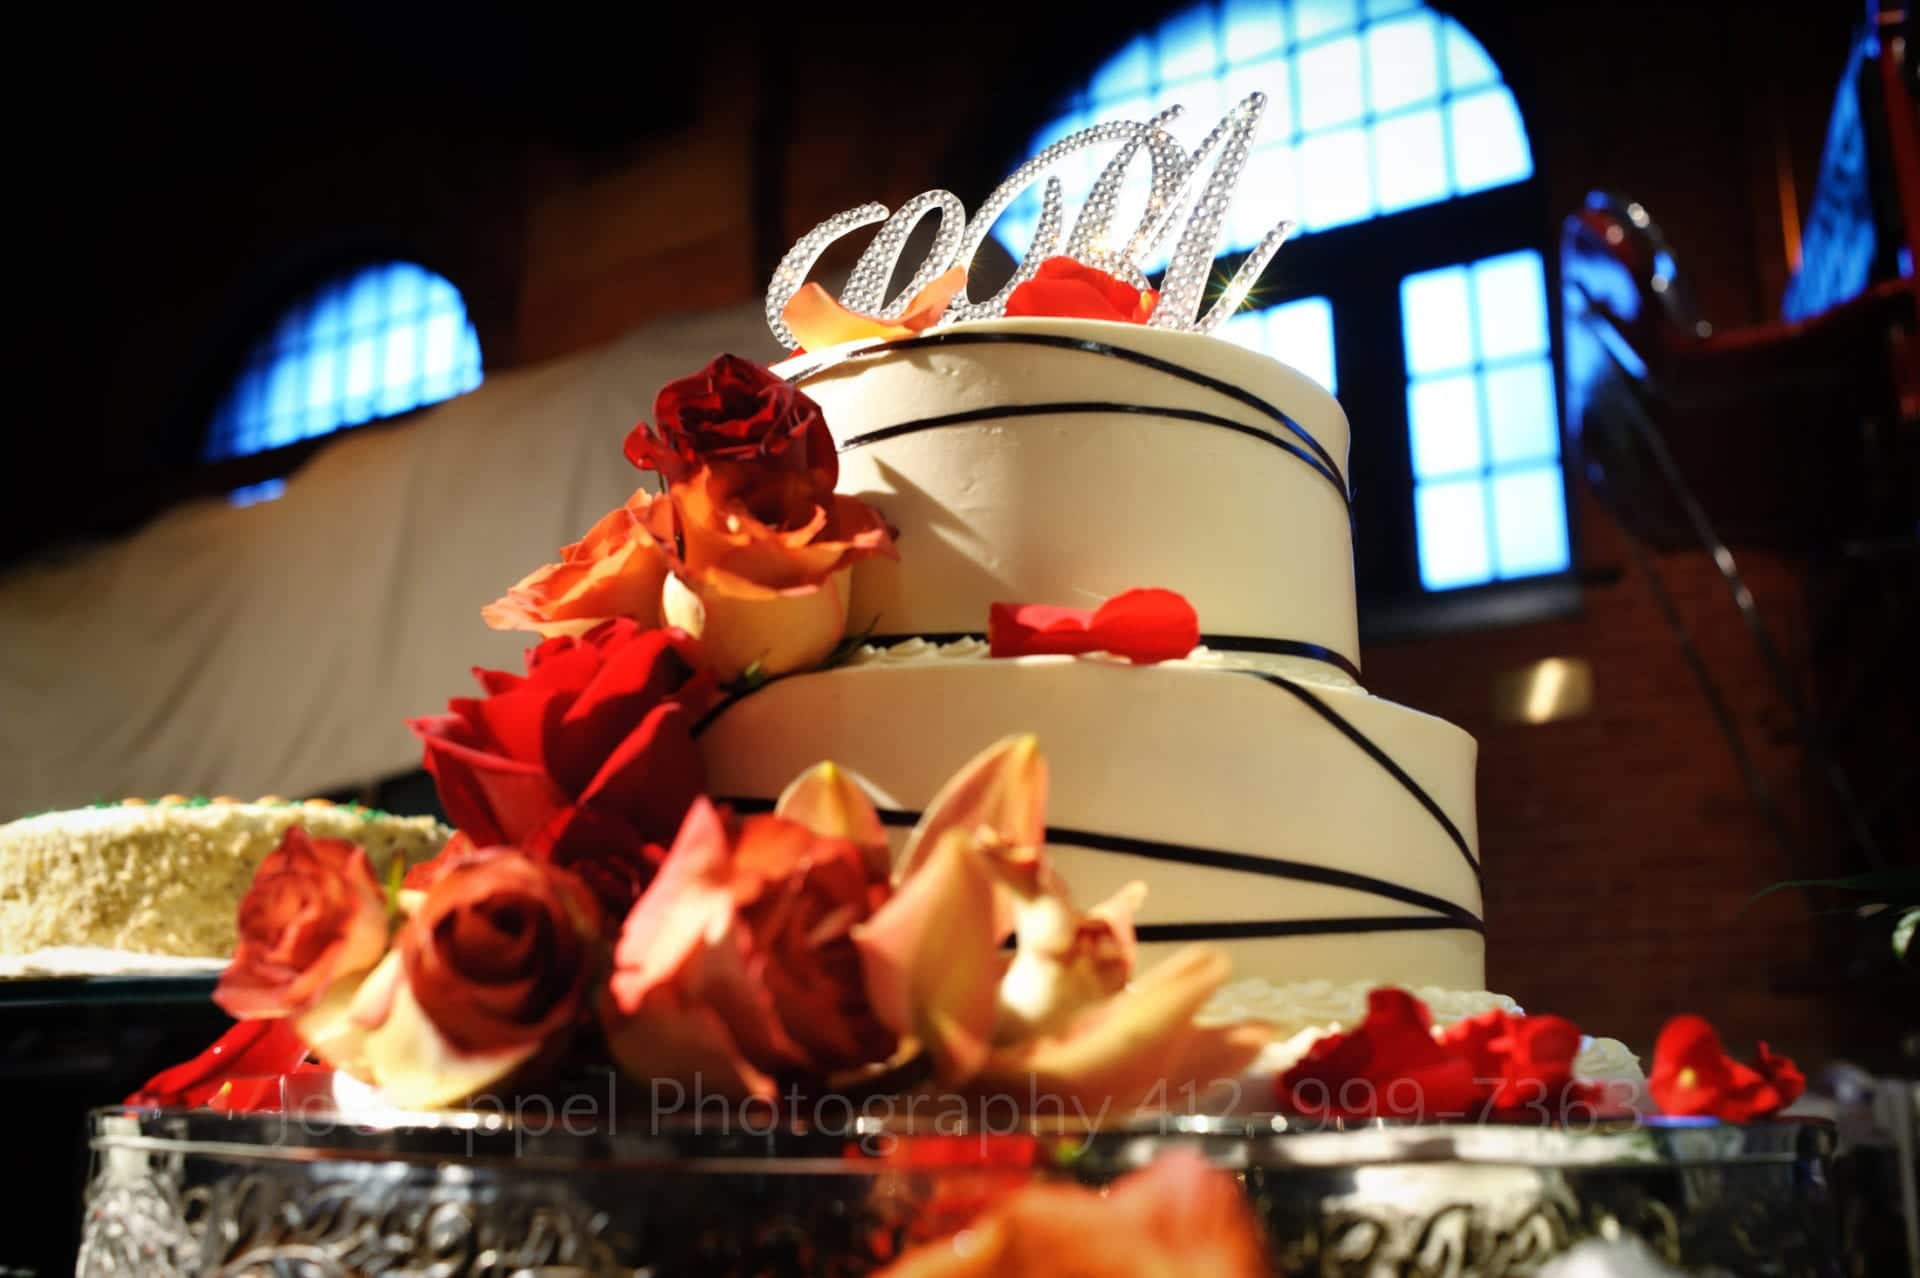 A white cake with red and orange flowers. The crystal initialed topper shimmers in the light. There's a blue window behind the cake.